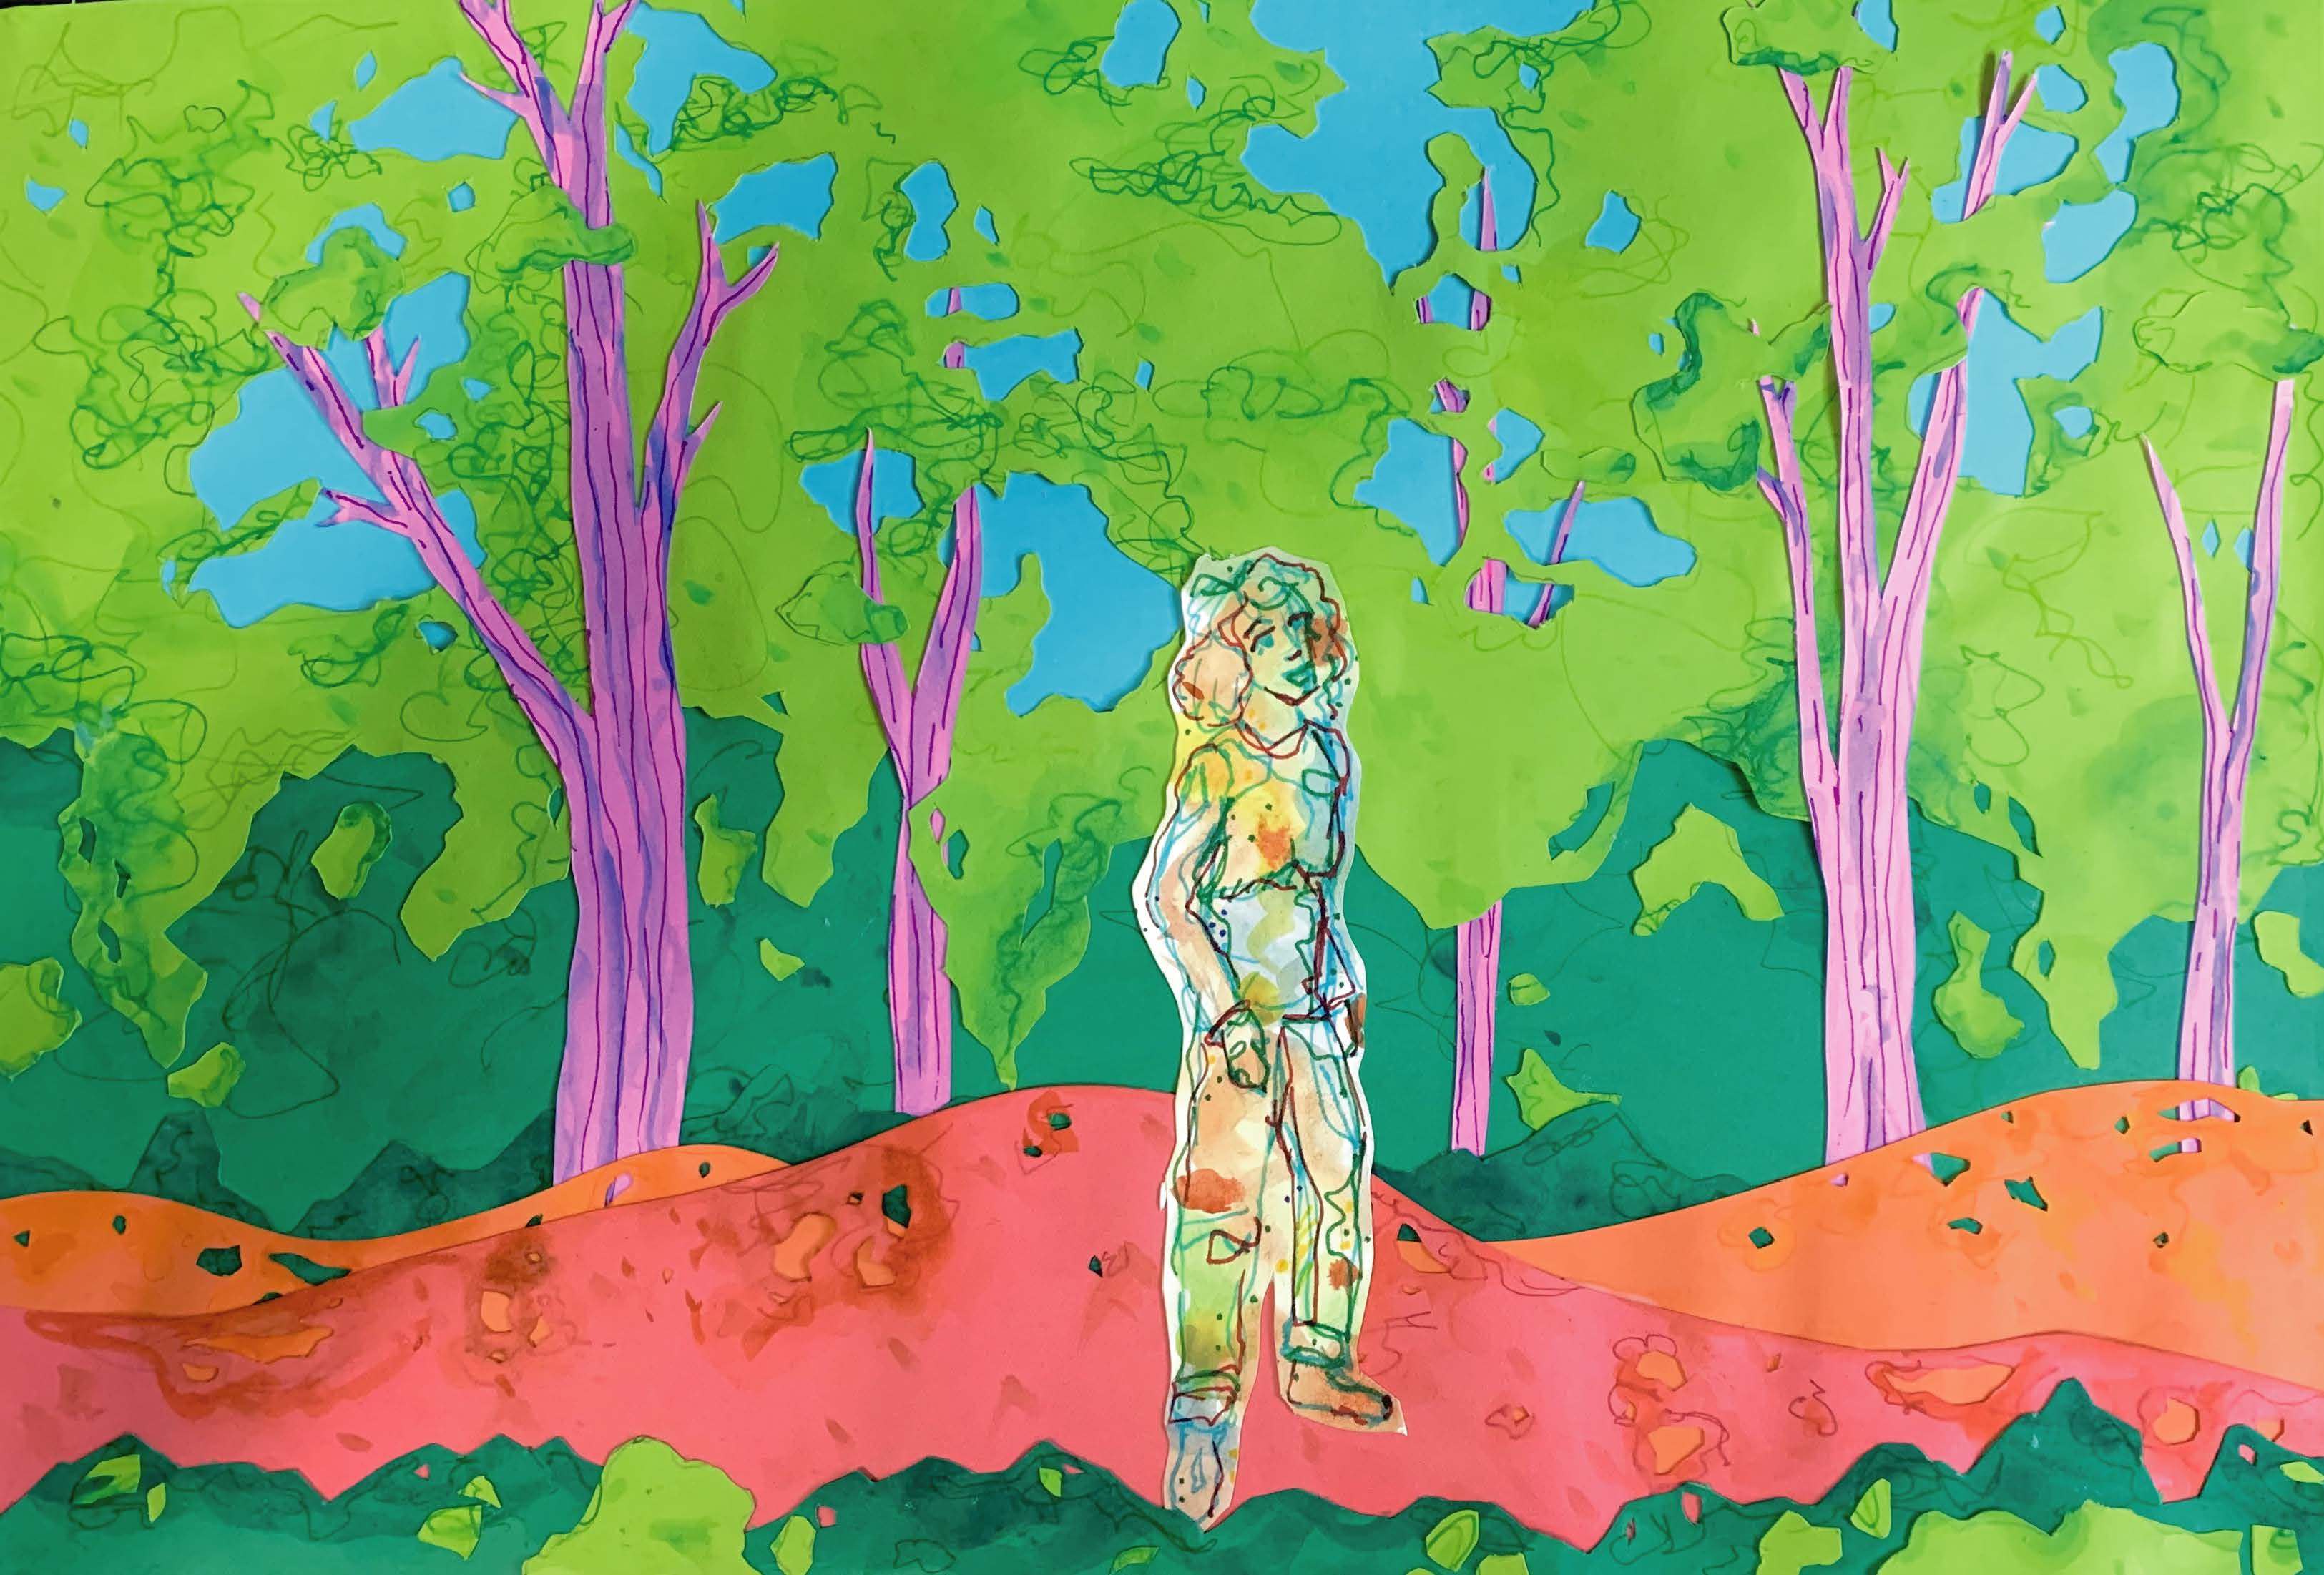 Colorful art that depicts a person walking through a bright stylized forest.